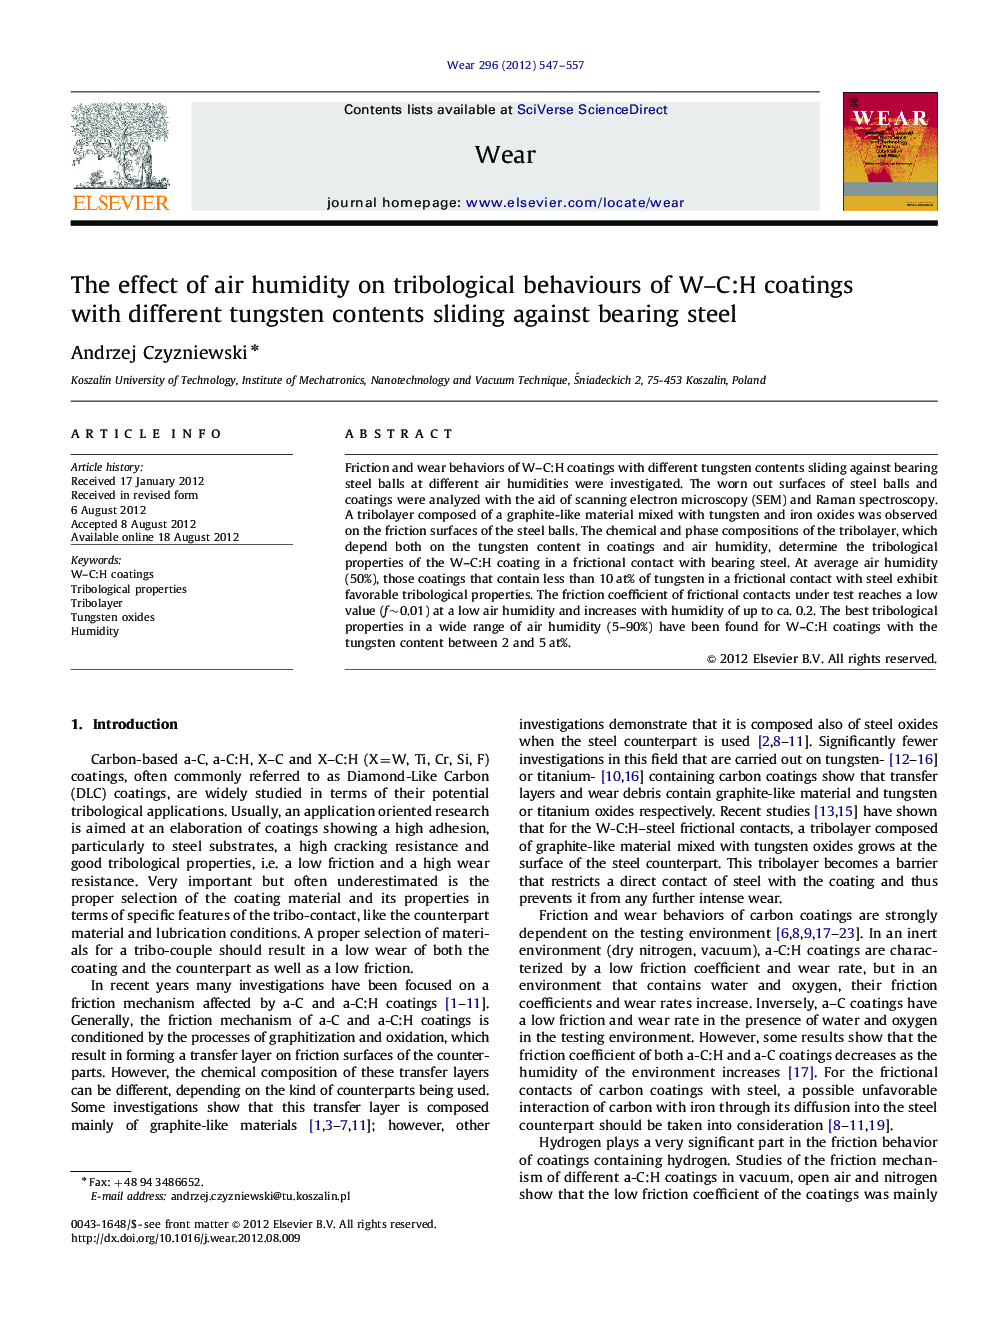 The effect of air humidity on tribological behaviours of W–C:H coatings with different tungsten contents sliding against bearing steel